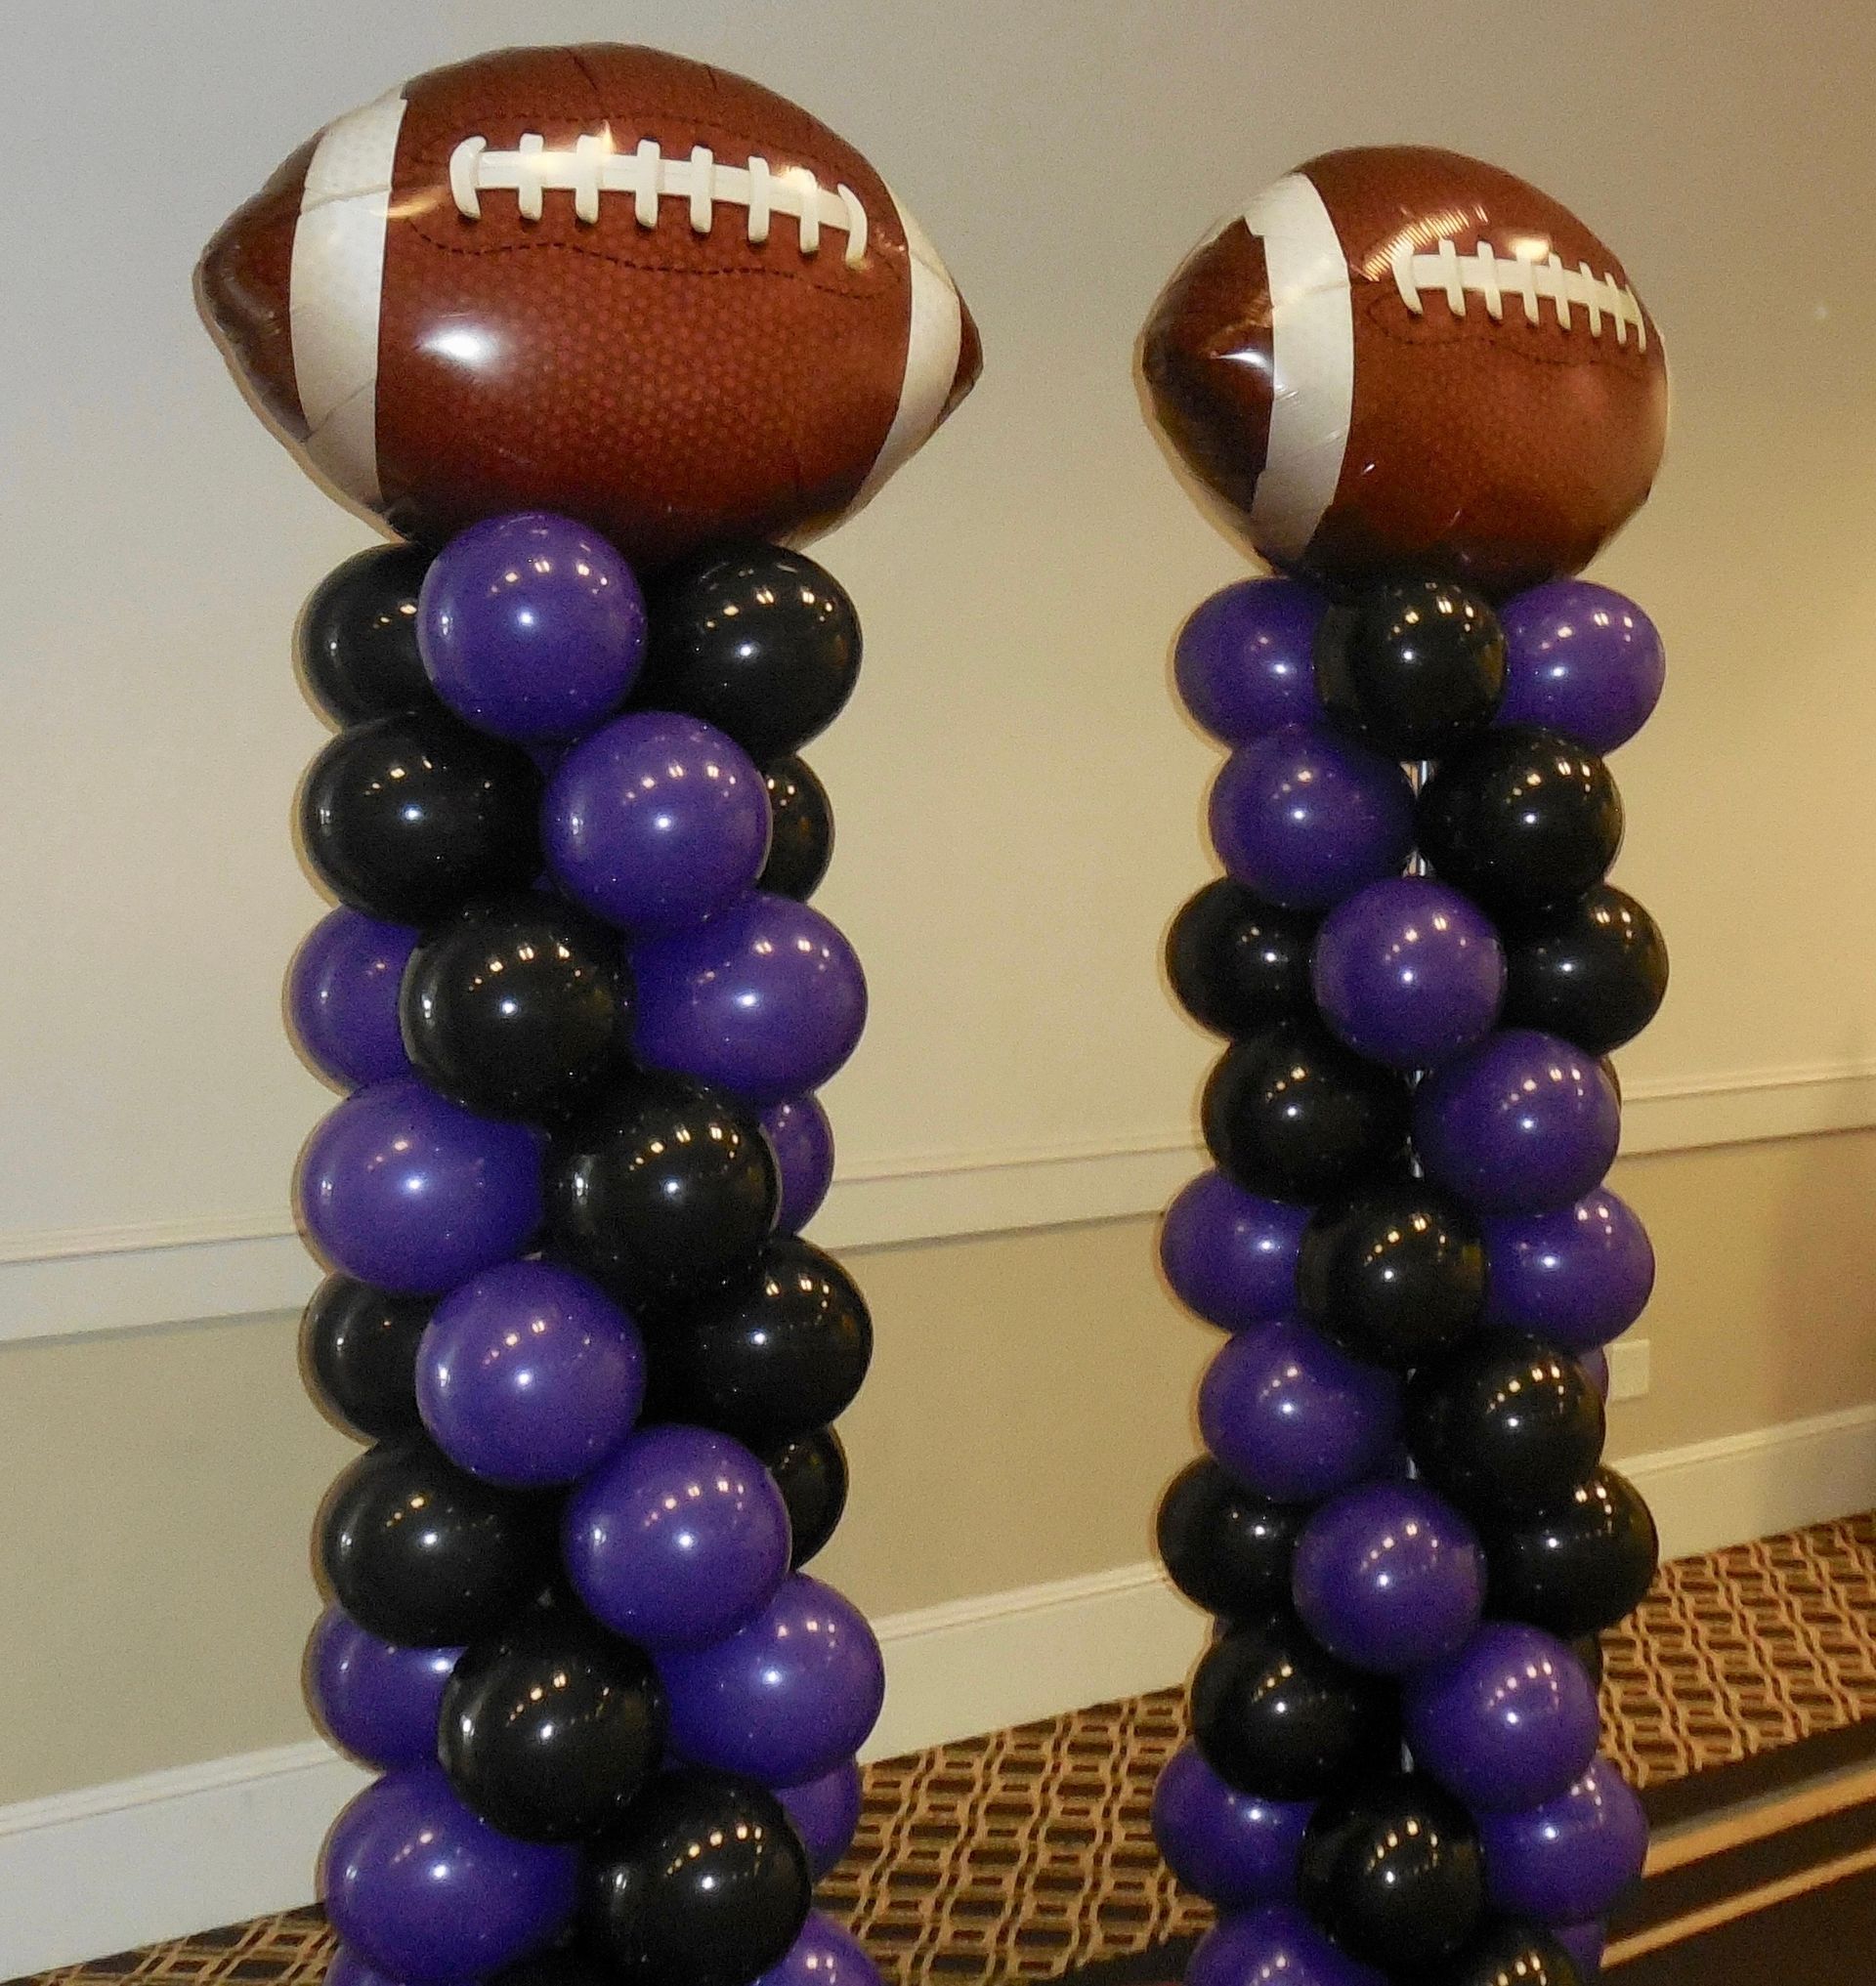 Two football shaped balloons are on top of purple and black balloons